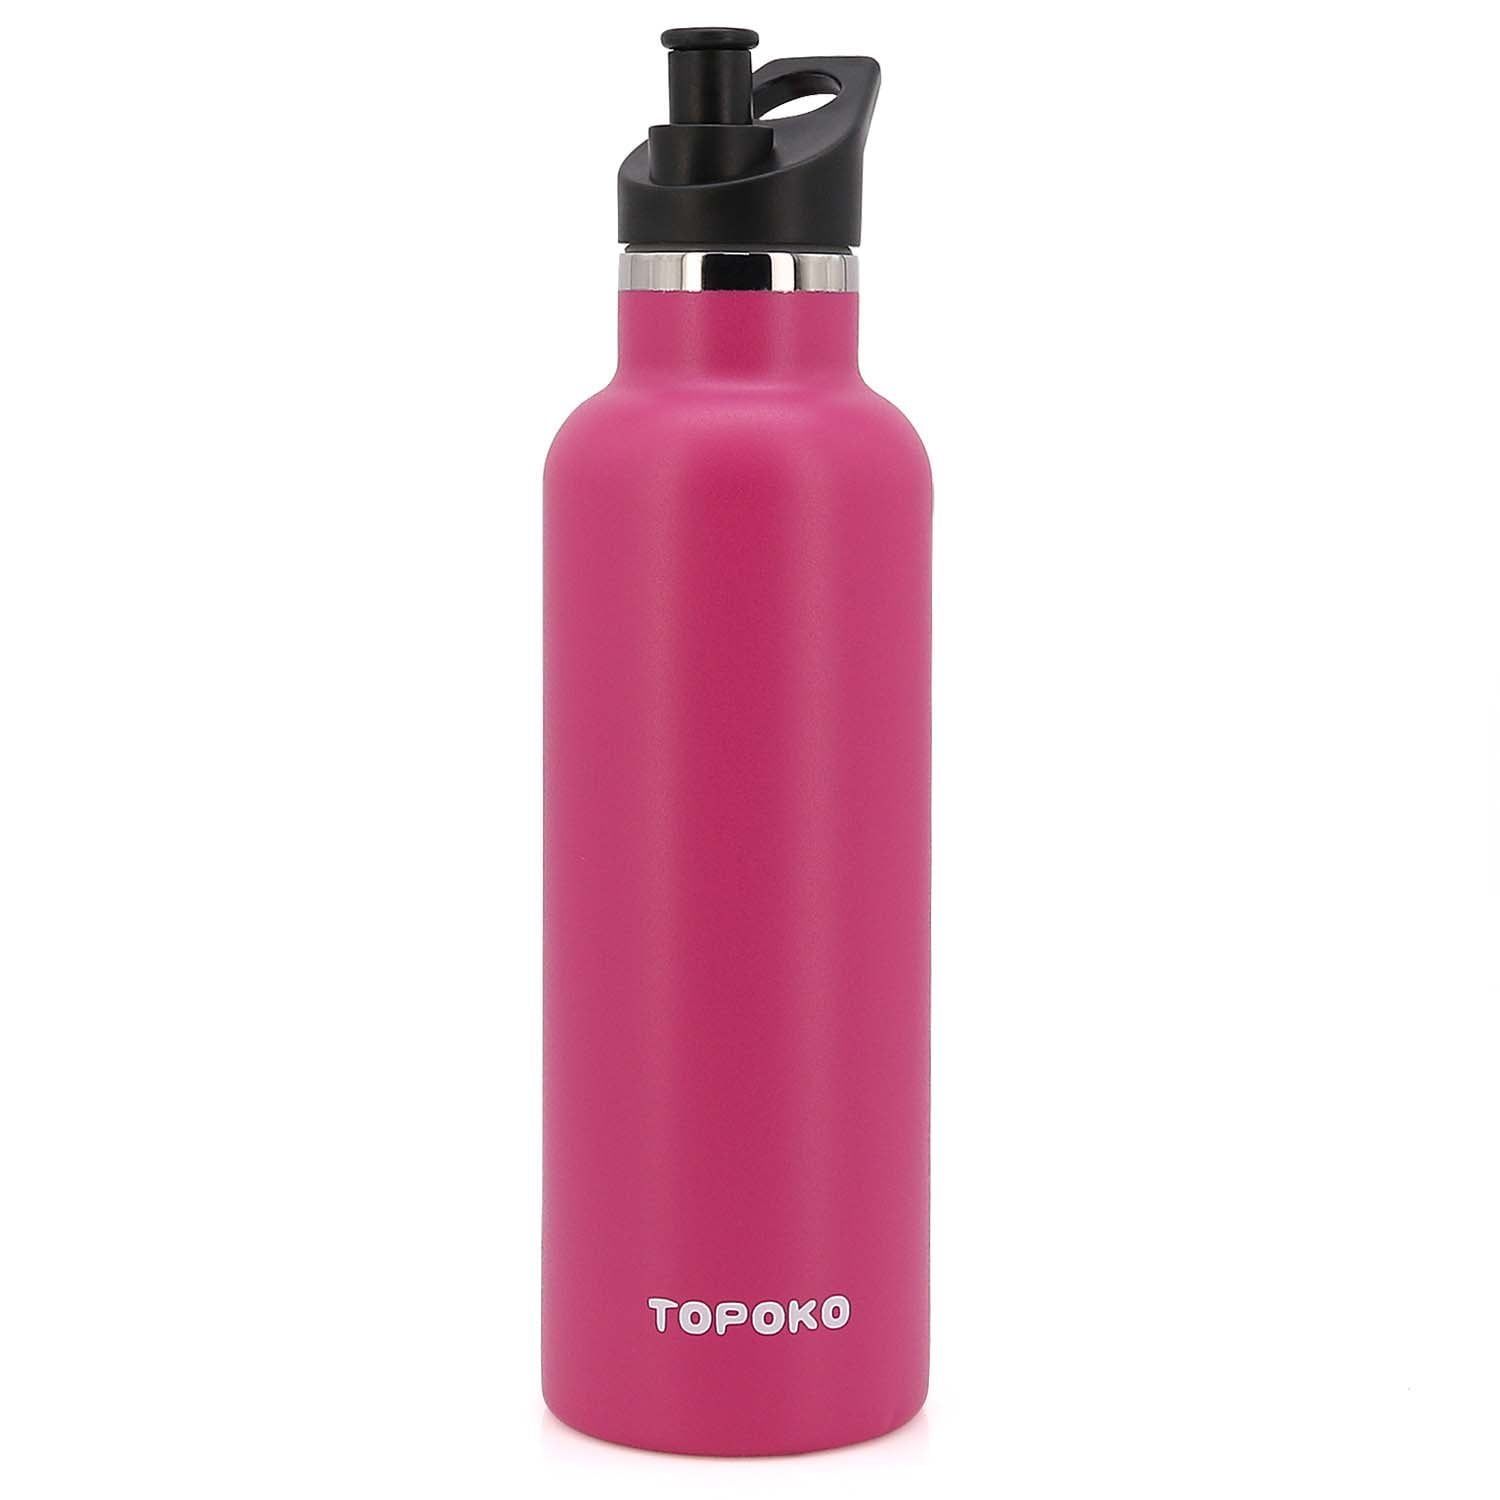 Sweat Proof Vacuum Insulated Stainless Steel With Carrying Handle-25 OZ Leak Proof Vacuum Insulated TOPOKO AUTOFLIP Stainless Steel Bottle Double Wall Water Bottle Wide Mouth